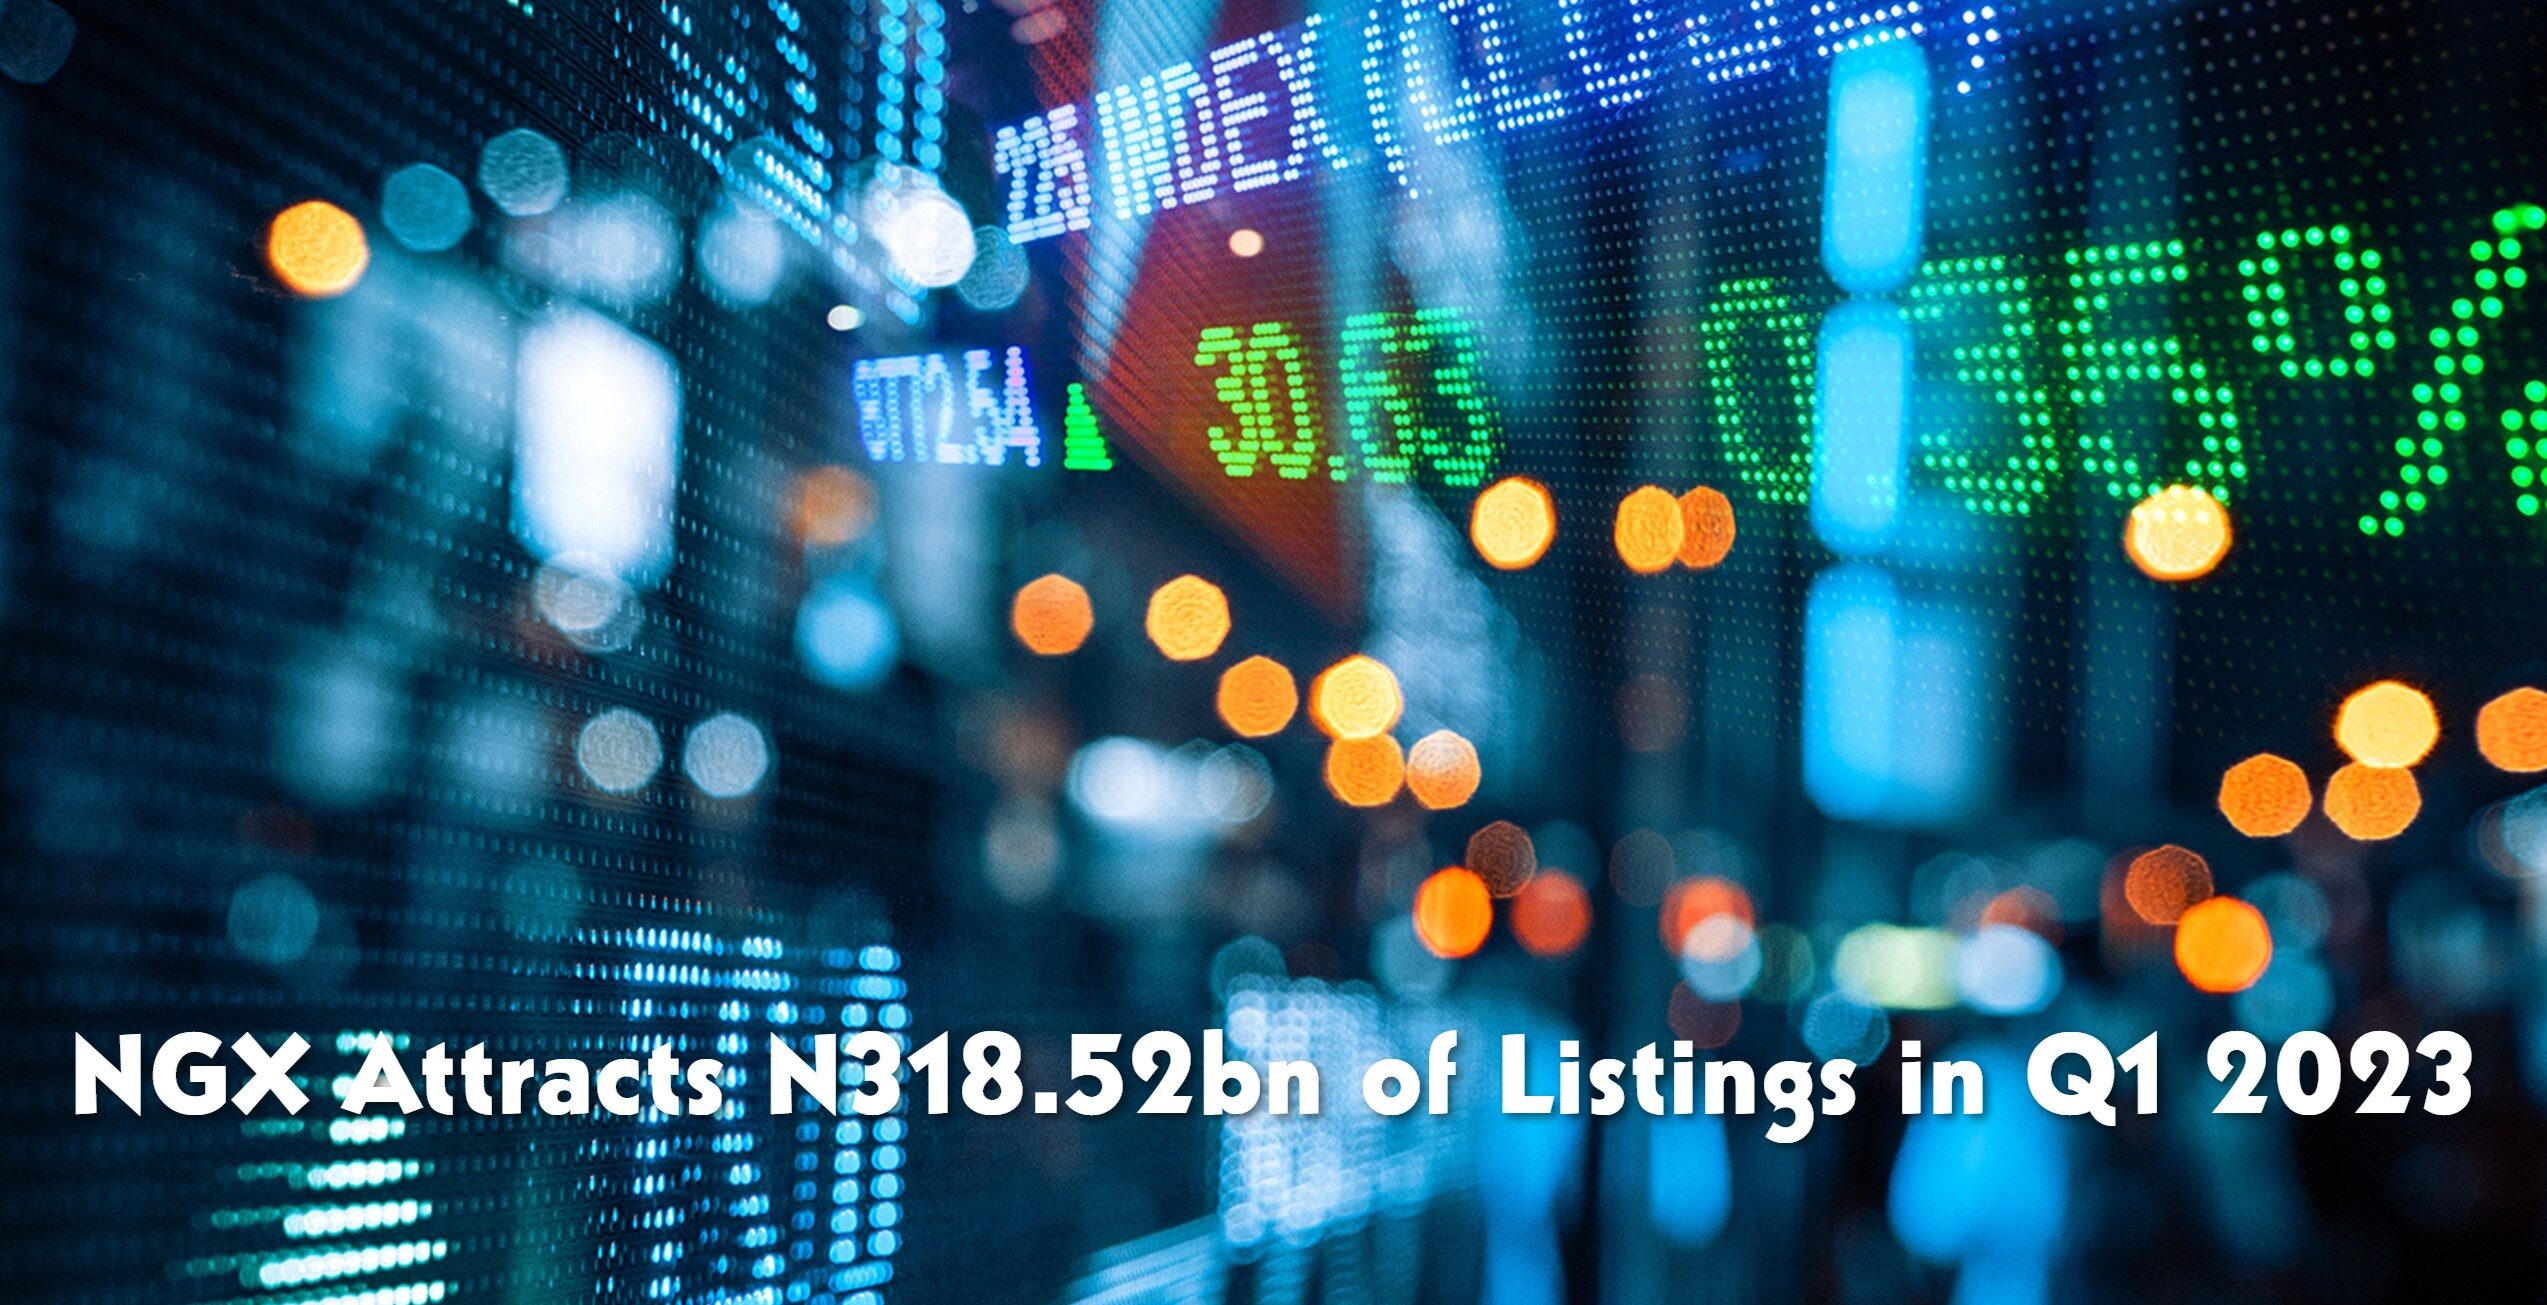 NGX Attracts N318.52bn of Listings in Q1 2023